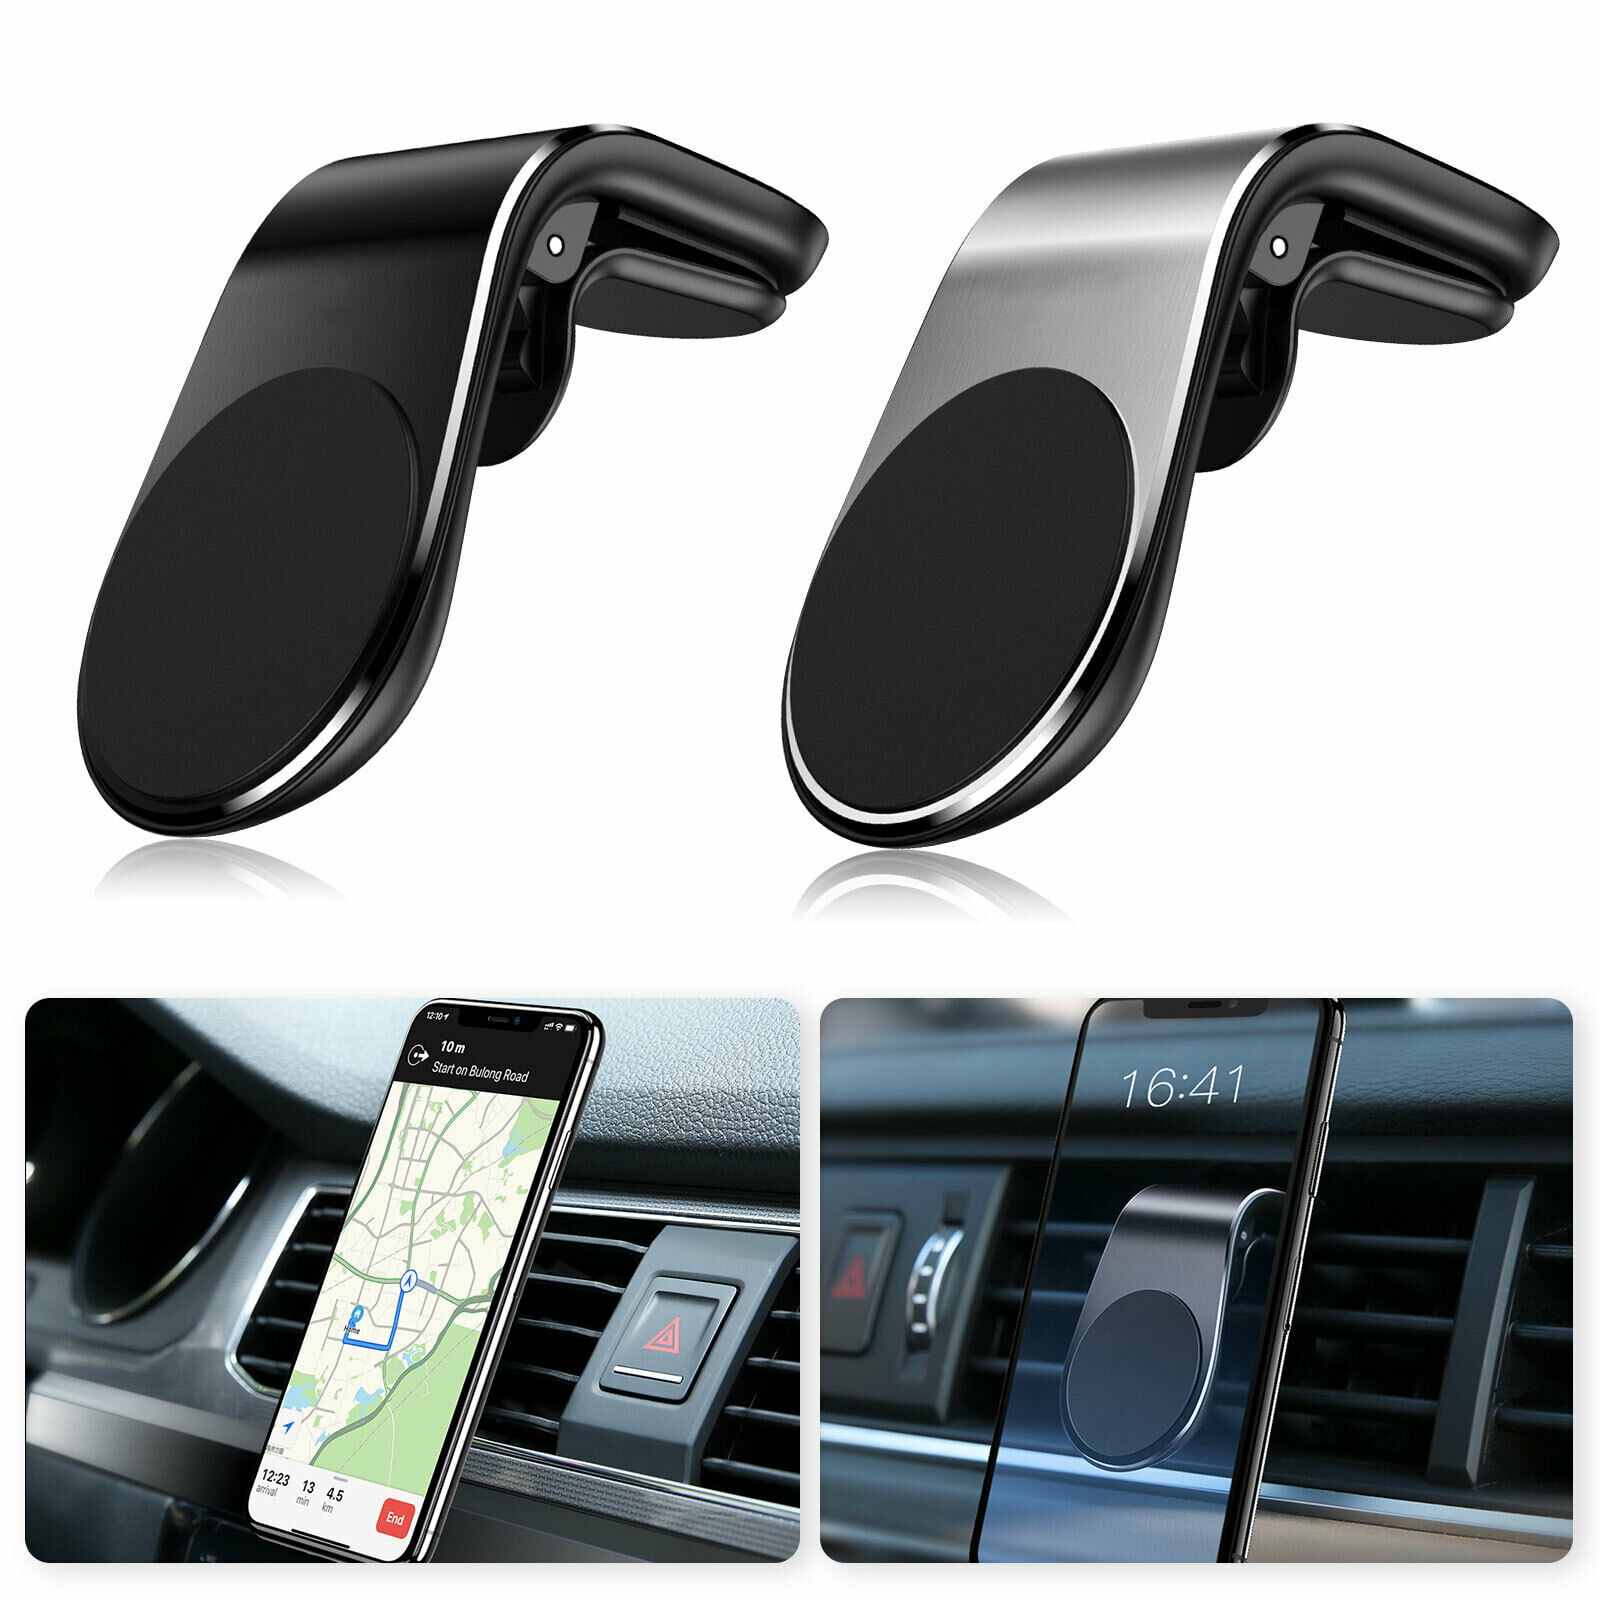 KMMOTORS Universal 360 Degree Car Smartphone Mount with Various Install Manage Car Mount Holder Cradle Compatible with iPhone X 8 8 Plus 7 7 Plus SE 6s 6s Plus Samsung Galaxy S9 S8 S7 LG etc 4351484125 